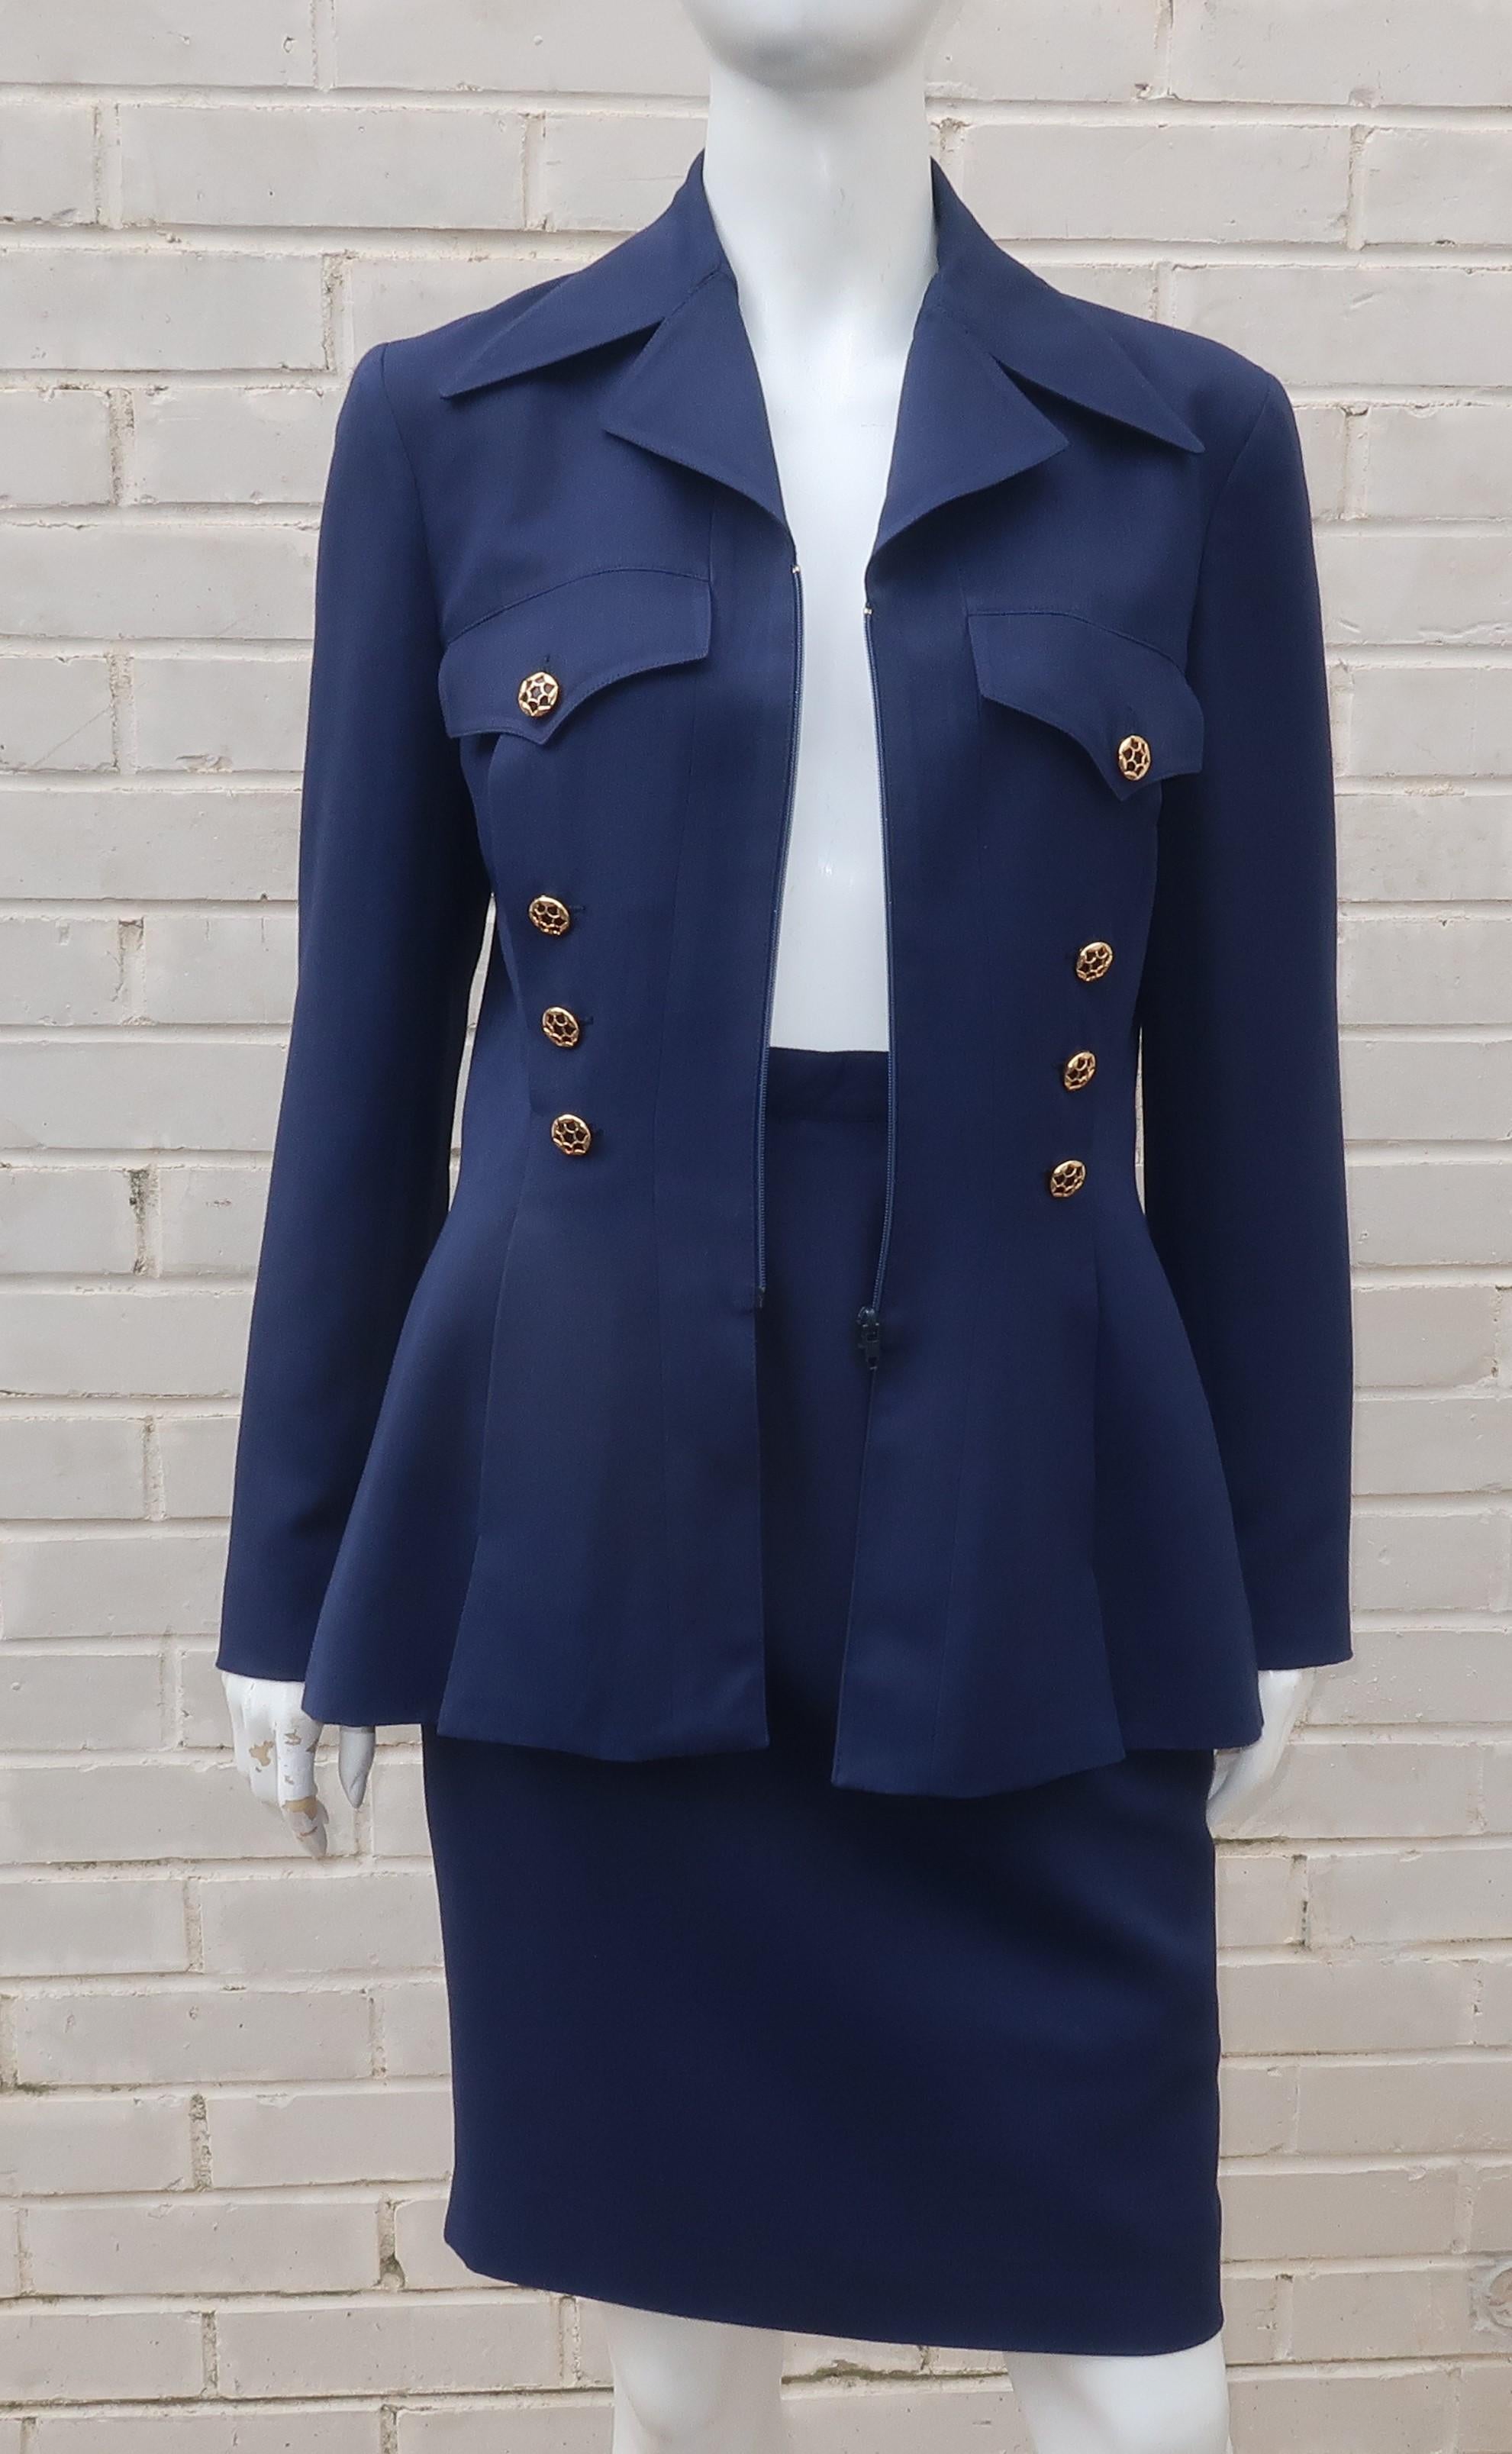 Karl Lagerfeld Navy Blue Skirt Suit With Gold Buttons 2